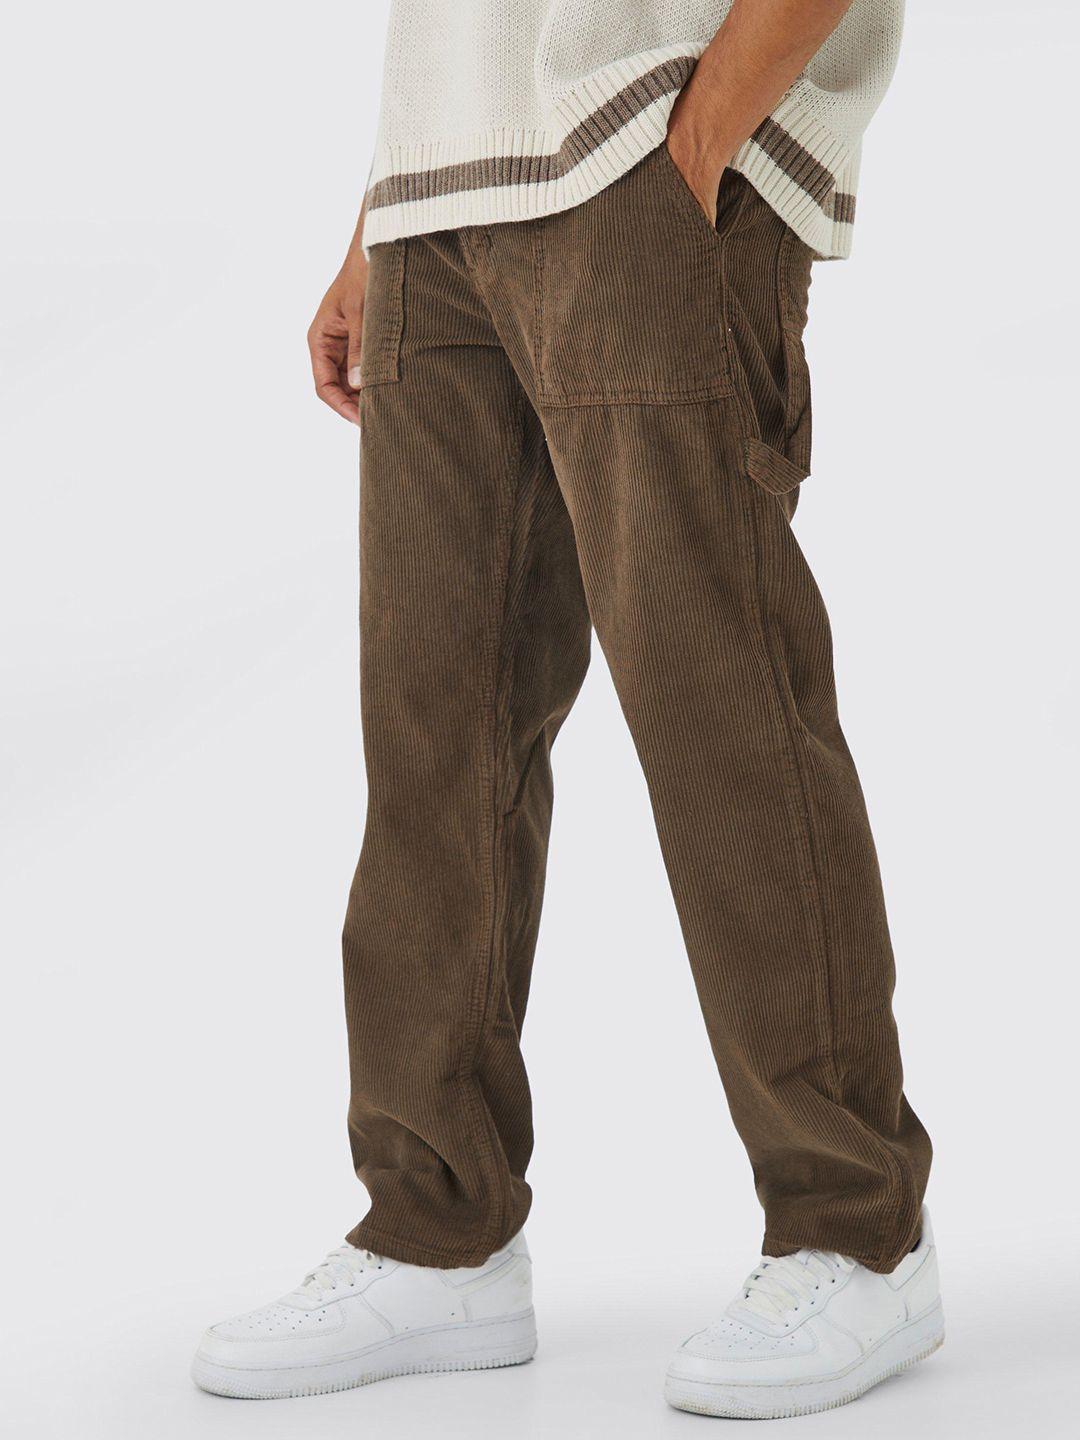 boohooman men relaxed corduroy trousers